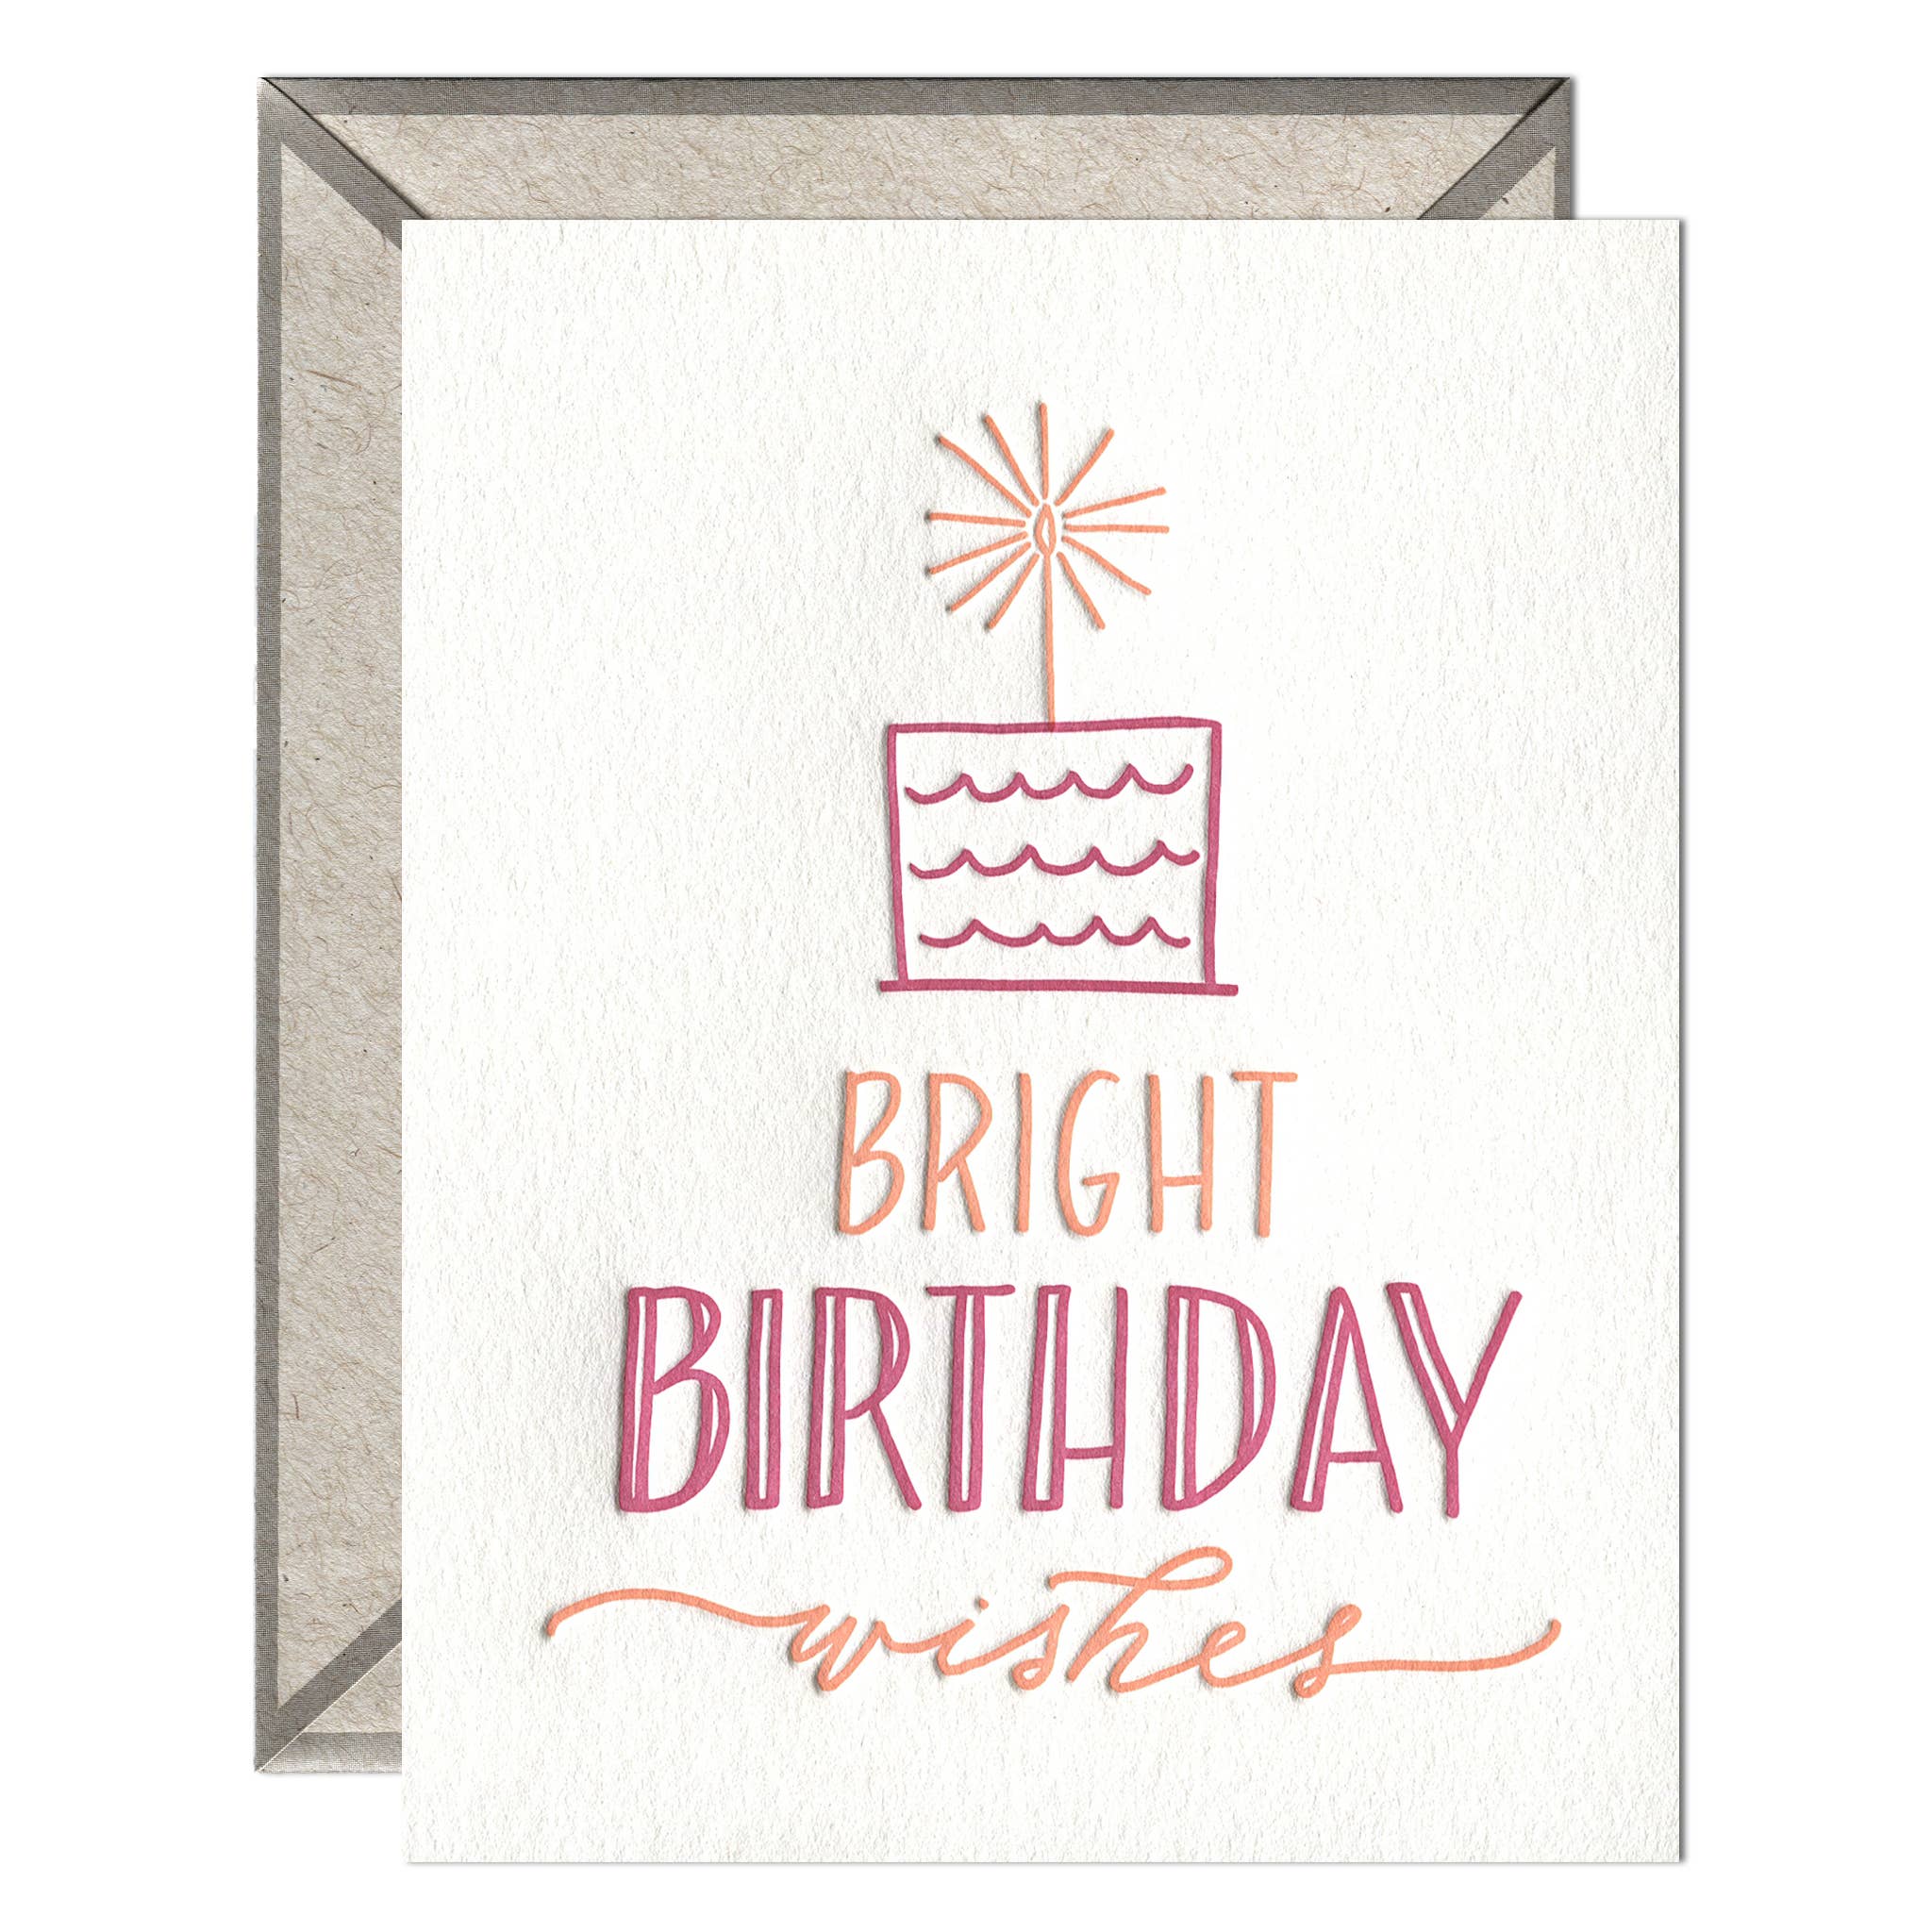 birthday wishes for best friend card